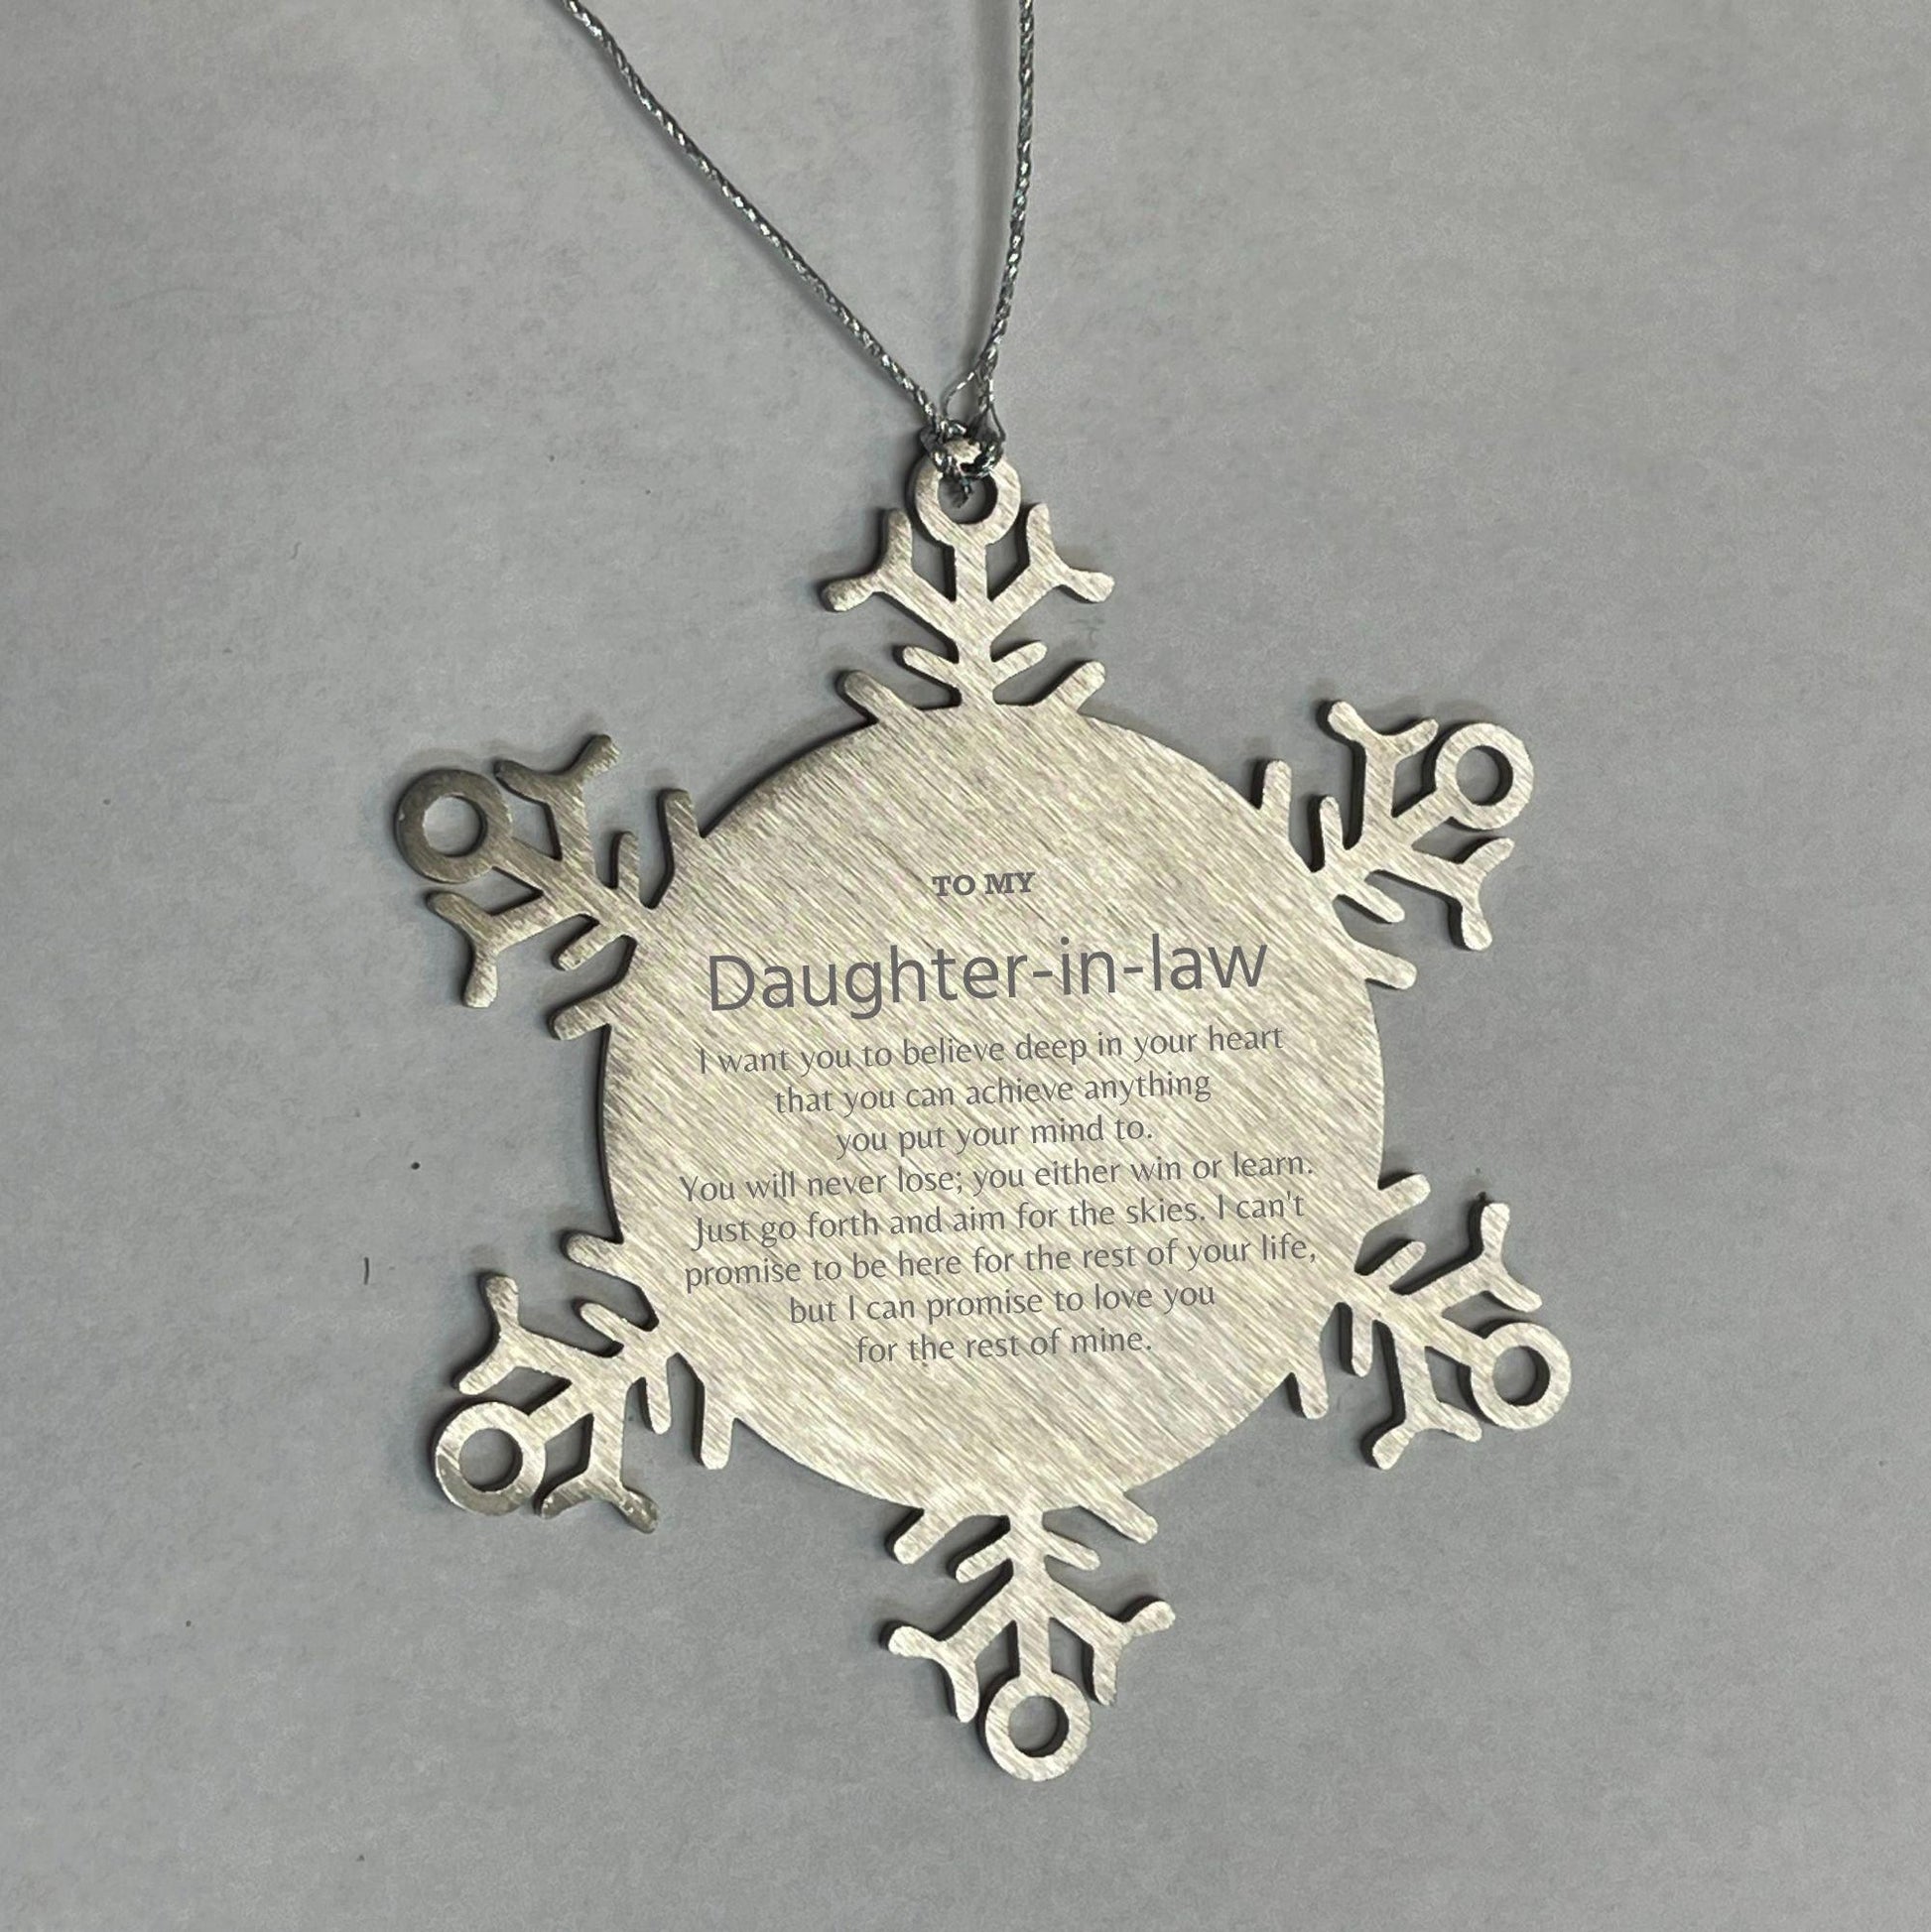 Motivational Daughter In Law Snowflake Ornament, Daughter In Law I can promise to love you for the rest of mine, Christmas Birthday Gifts - Mallard Moon Gift Shop